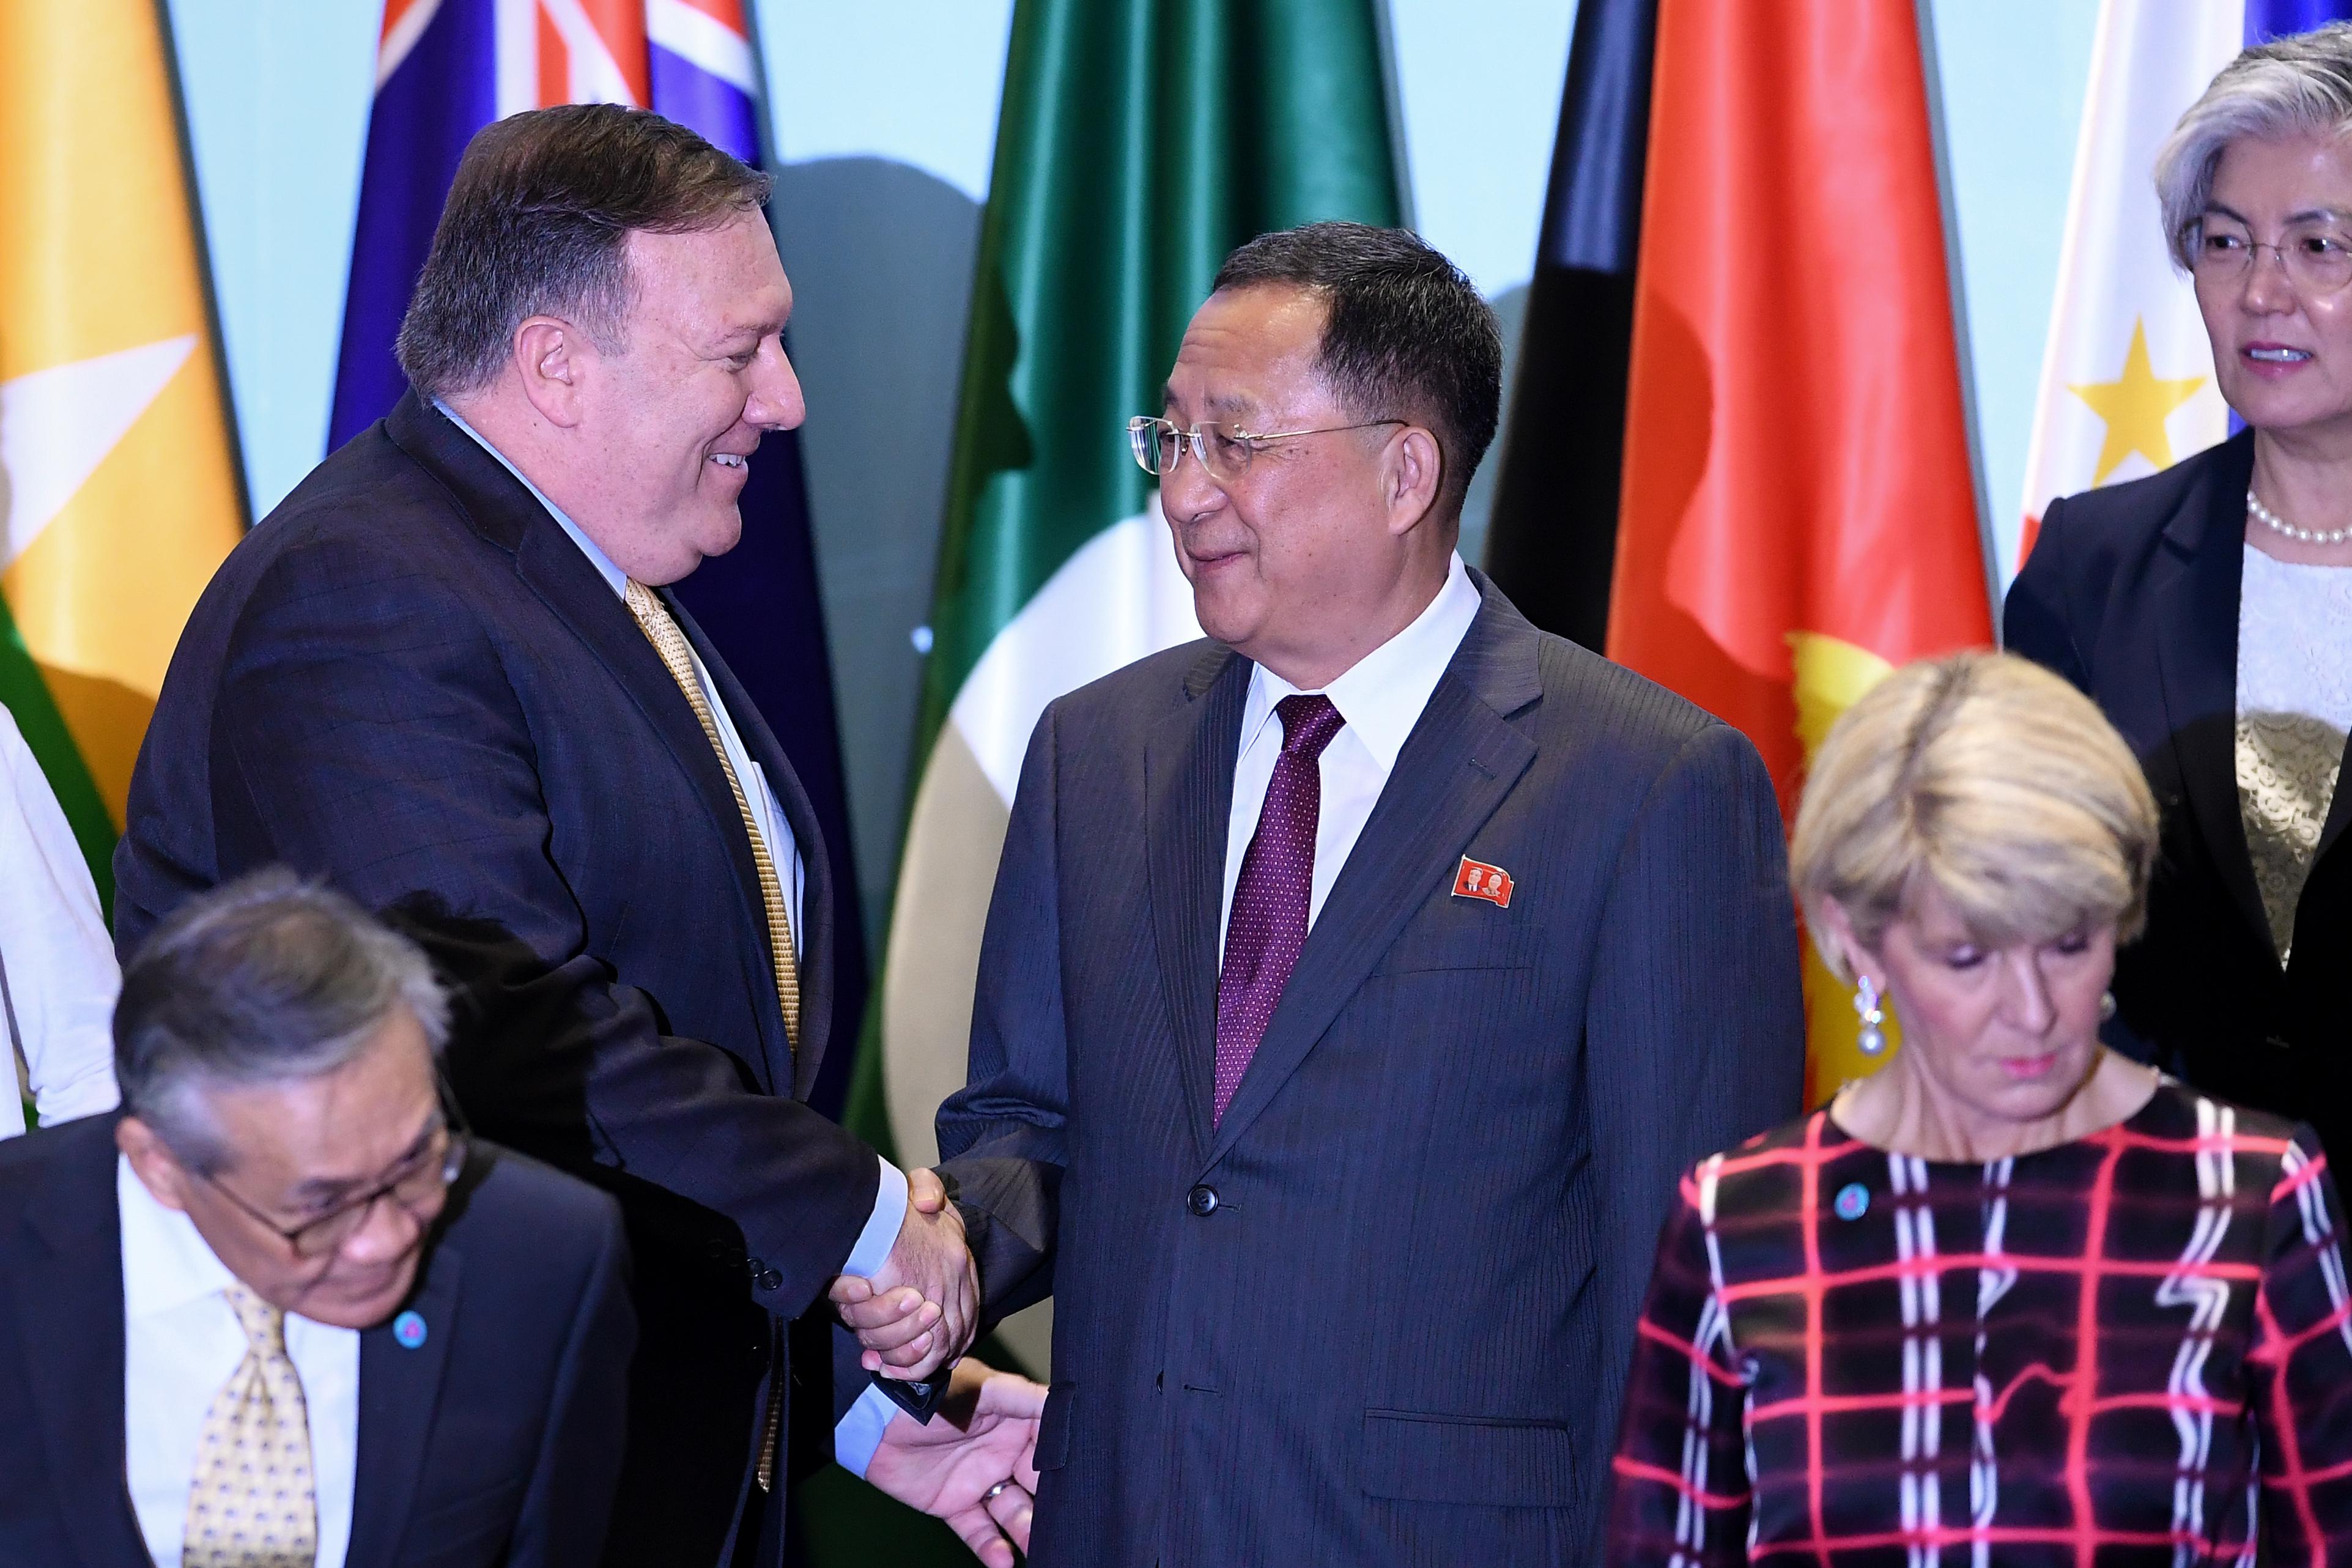 Secretary of State Mike Pompeo (top L) shakes hands with North Korea's Foreign Minister Ri Yong Ho (C) as South Korea's Foreign Minister Kang Kyung-wha (top R) looks on, as they arrive for a group photo at the ASEAN Regional Forum Retreat during the 51st Association of Southeast Asian Nations (ASEAN) Ministerial Meeting (AMM) in Singapore on August 4, 2018.